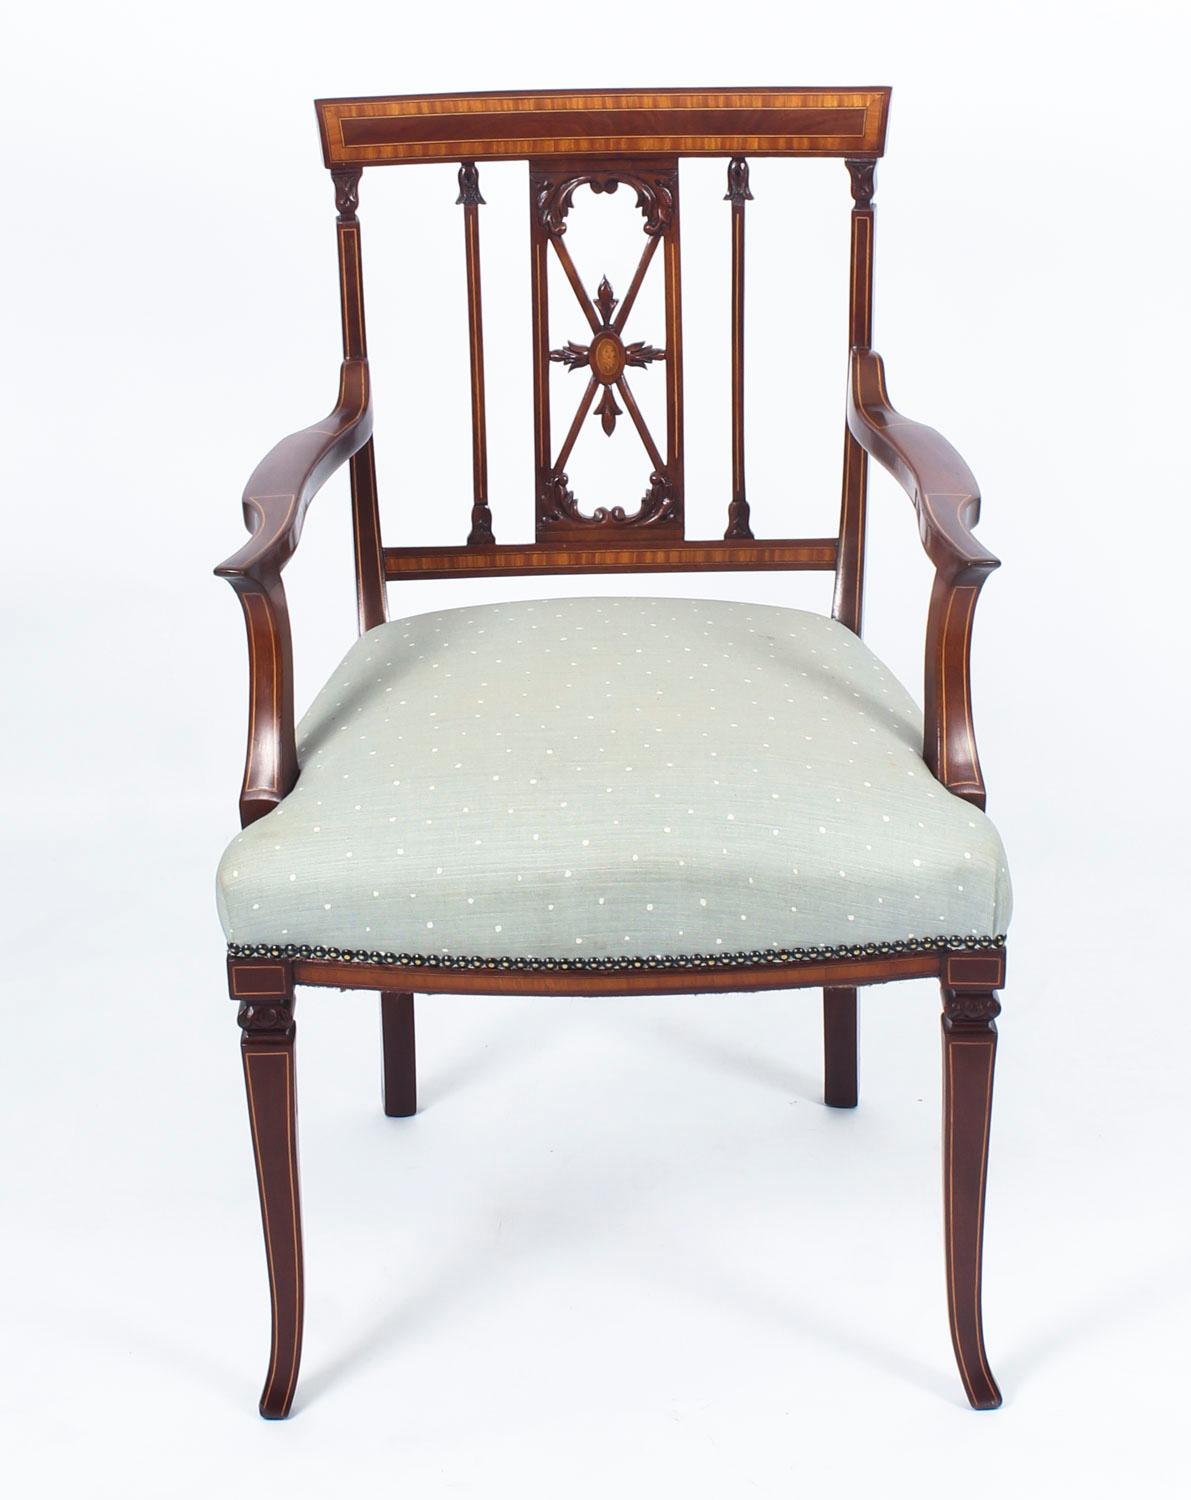 This is a beautiful antique Sheraton Revival mahogany armchair, circa 1880 in date.

With satinwood crossbanding and stringing and decorative pierced leaf carved splat with shell patera. It has outward scrolled arms on shaped supports, an